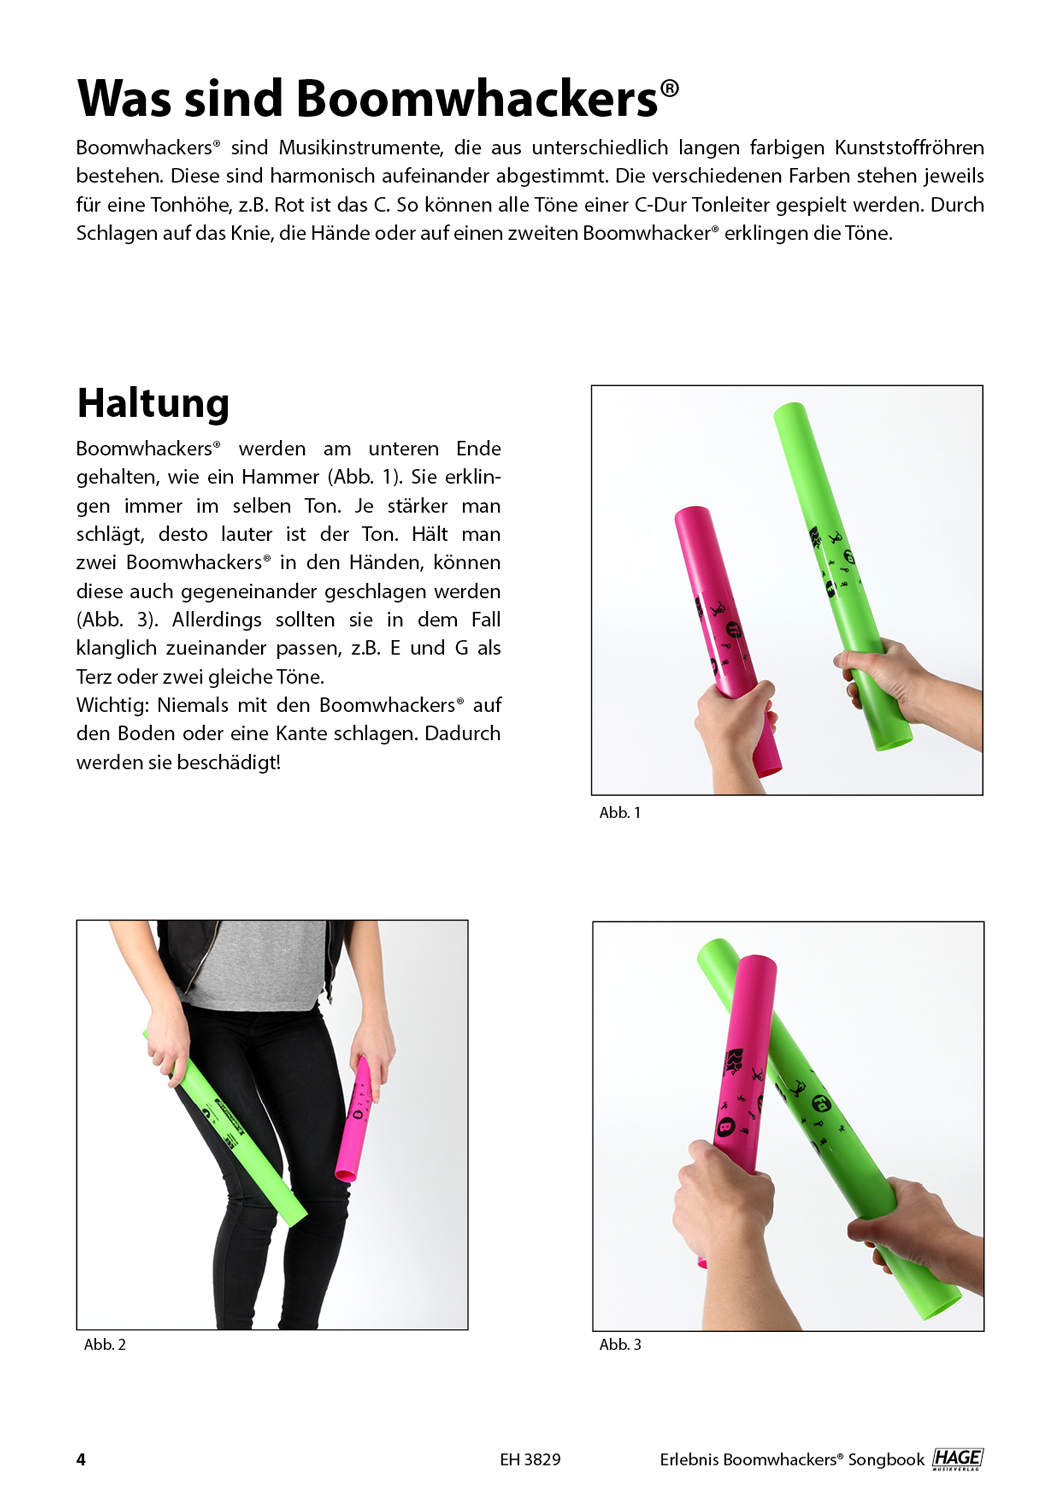 Erlebnis Boomwhackers® Songbook Pages 4